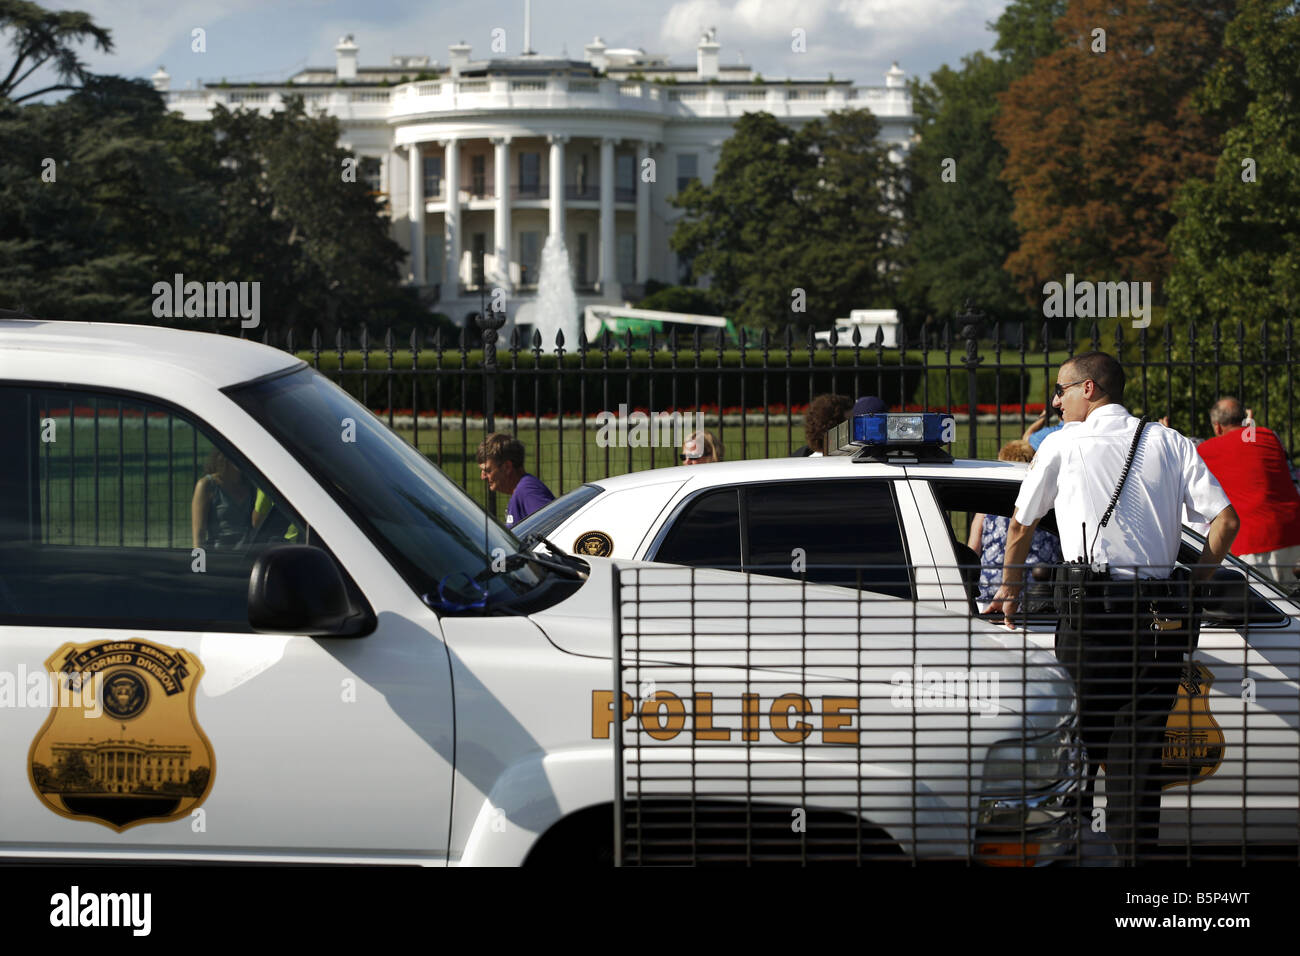 Police man in front of the South Portico of the White House, Washington D.C., USA Stock Photo